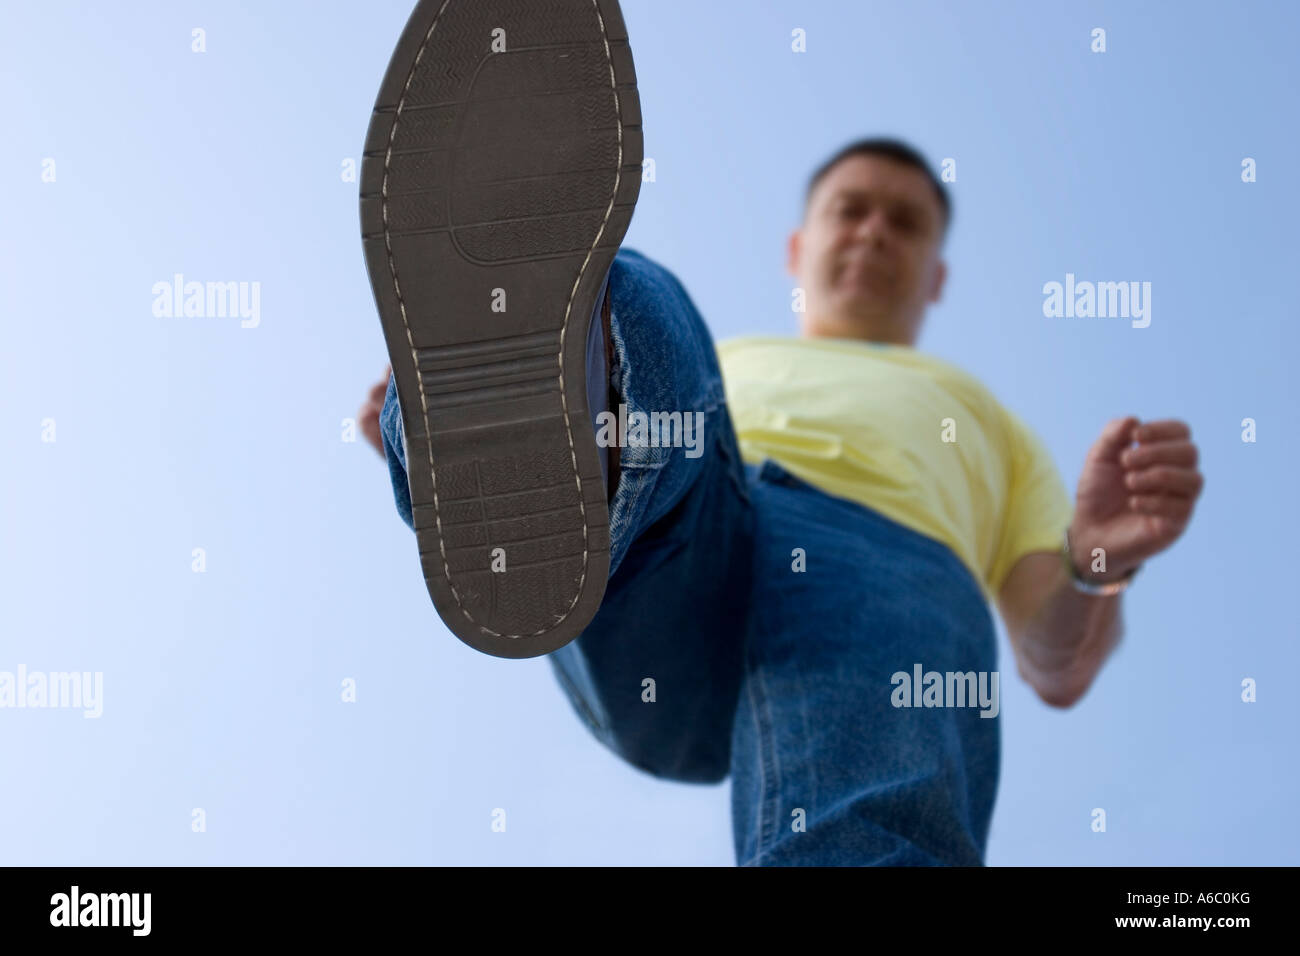 Funny exaggerated image of a man about to squash something with the sole of his large shoe. Stock Photo